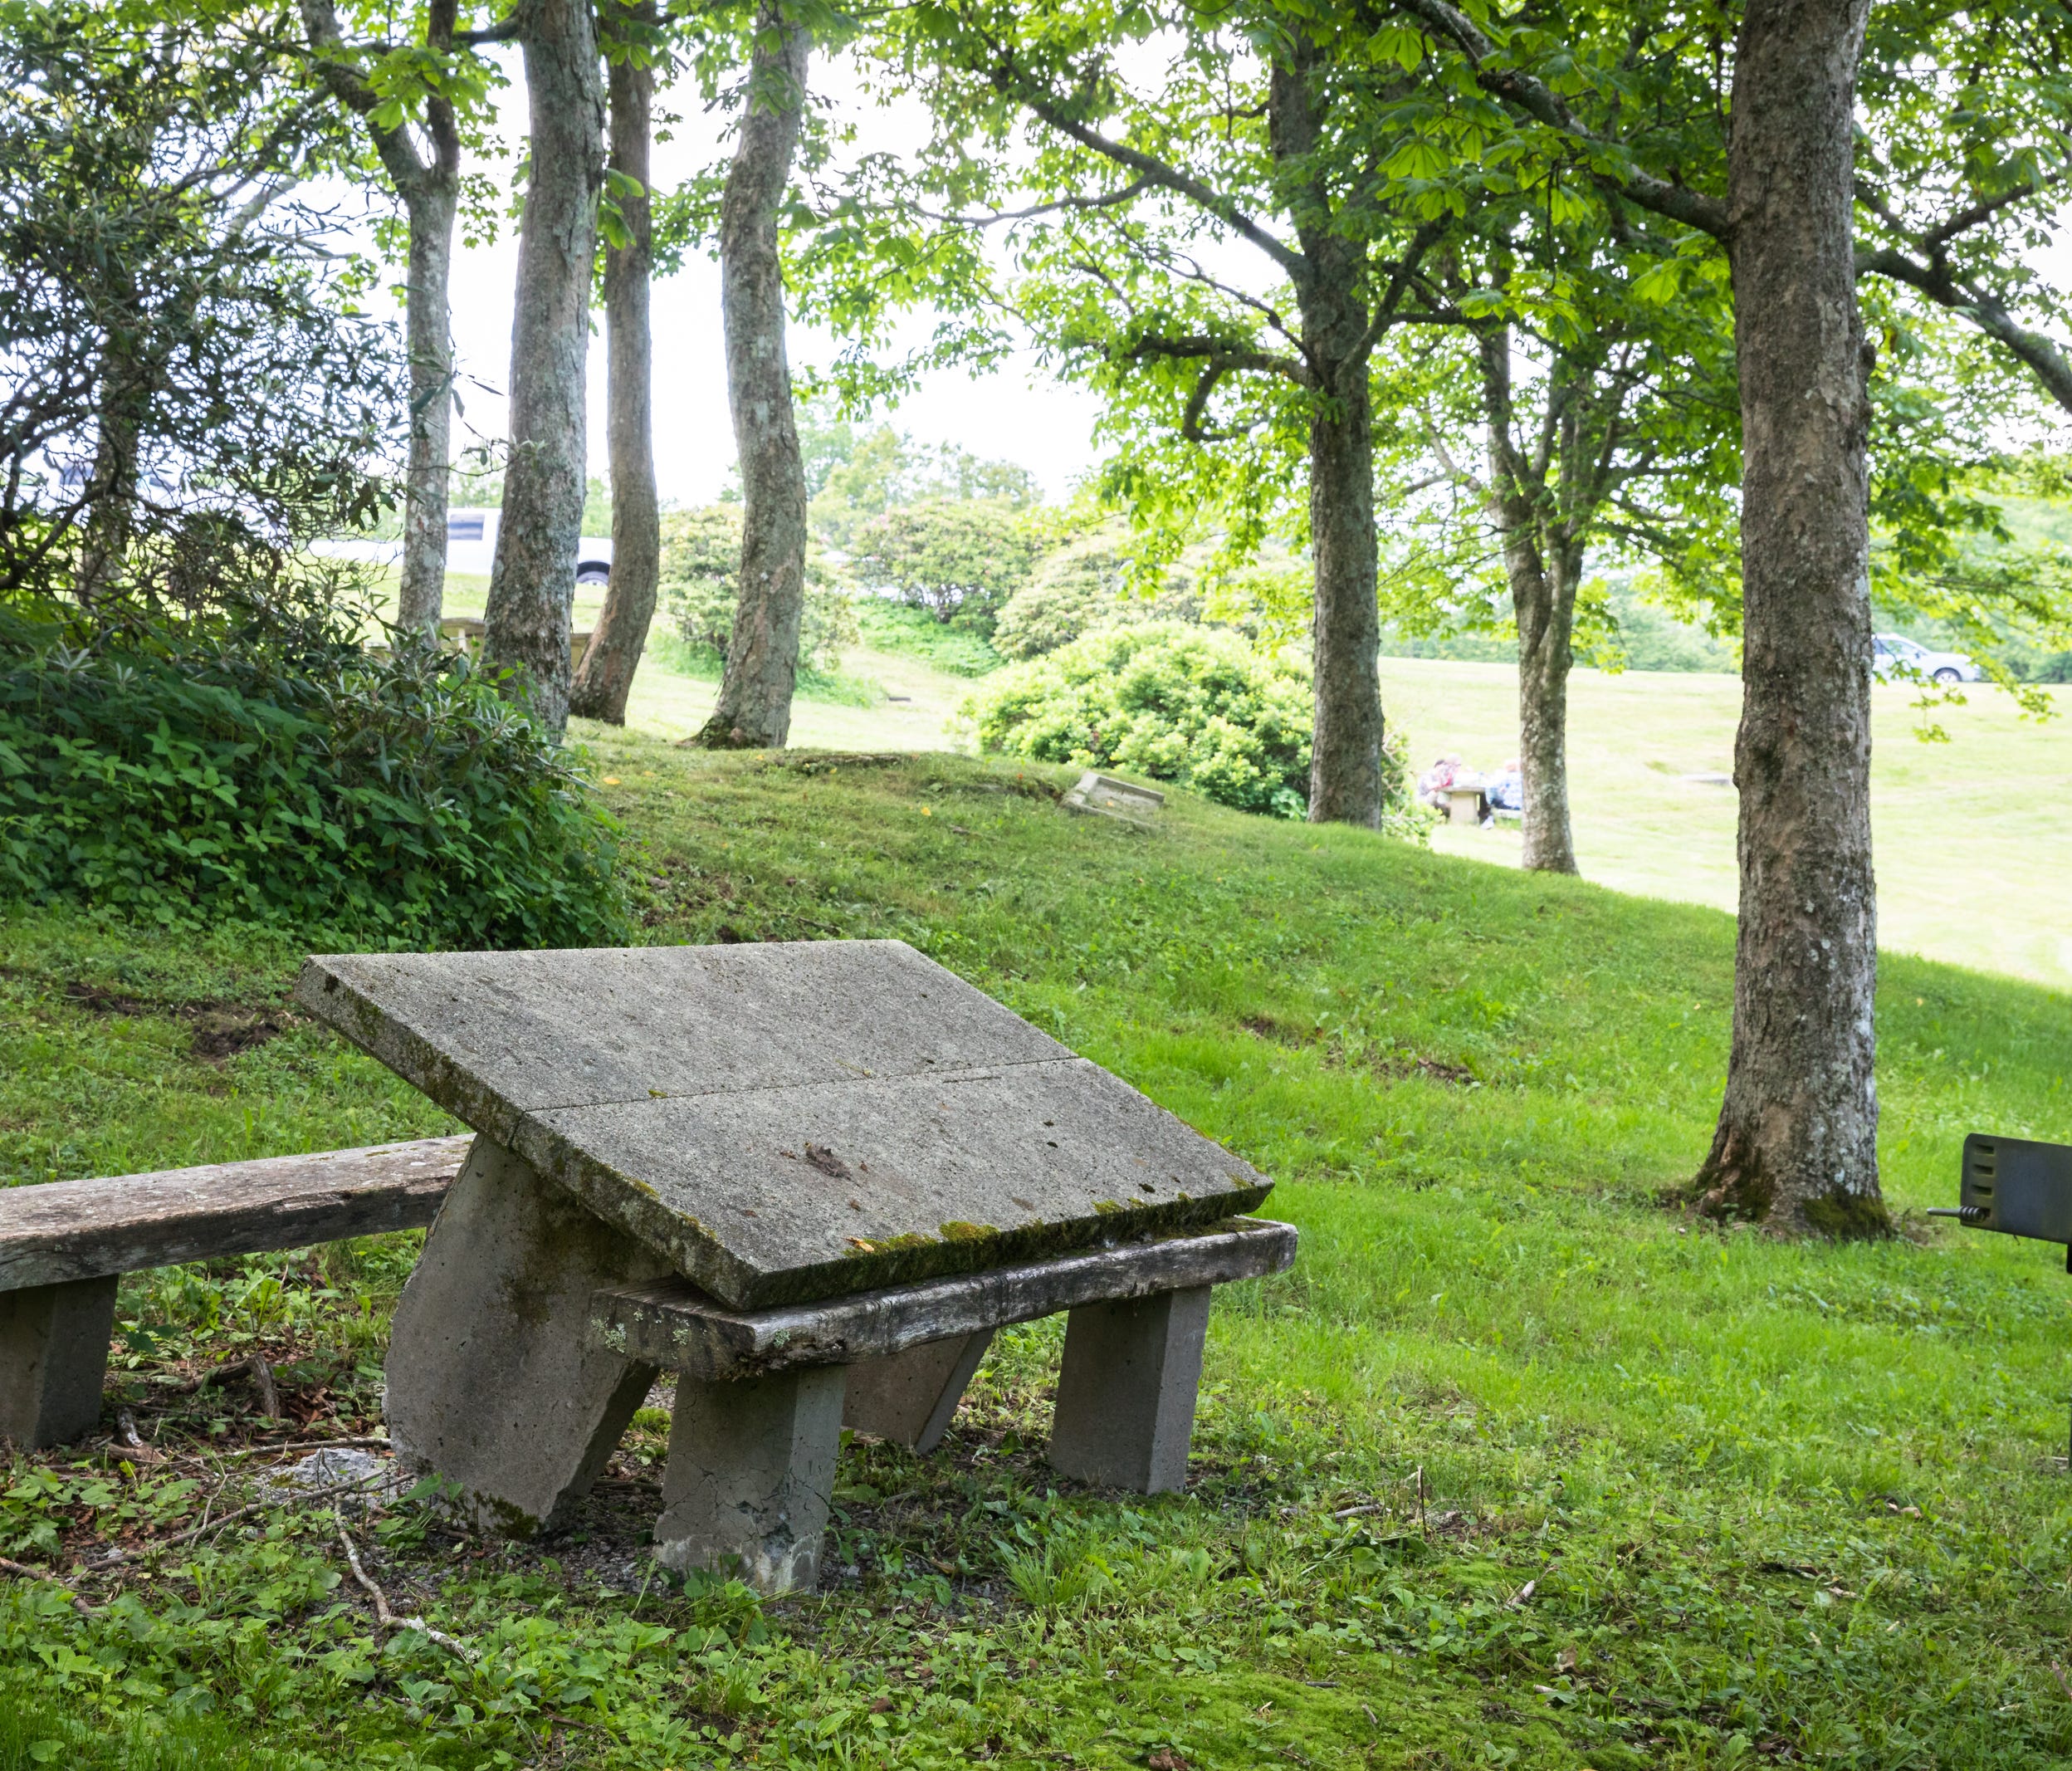 One of the damaged concrete picnic tables at the Craggy Gardens picnic area.